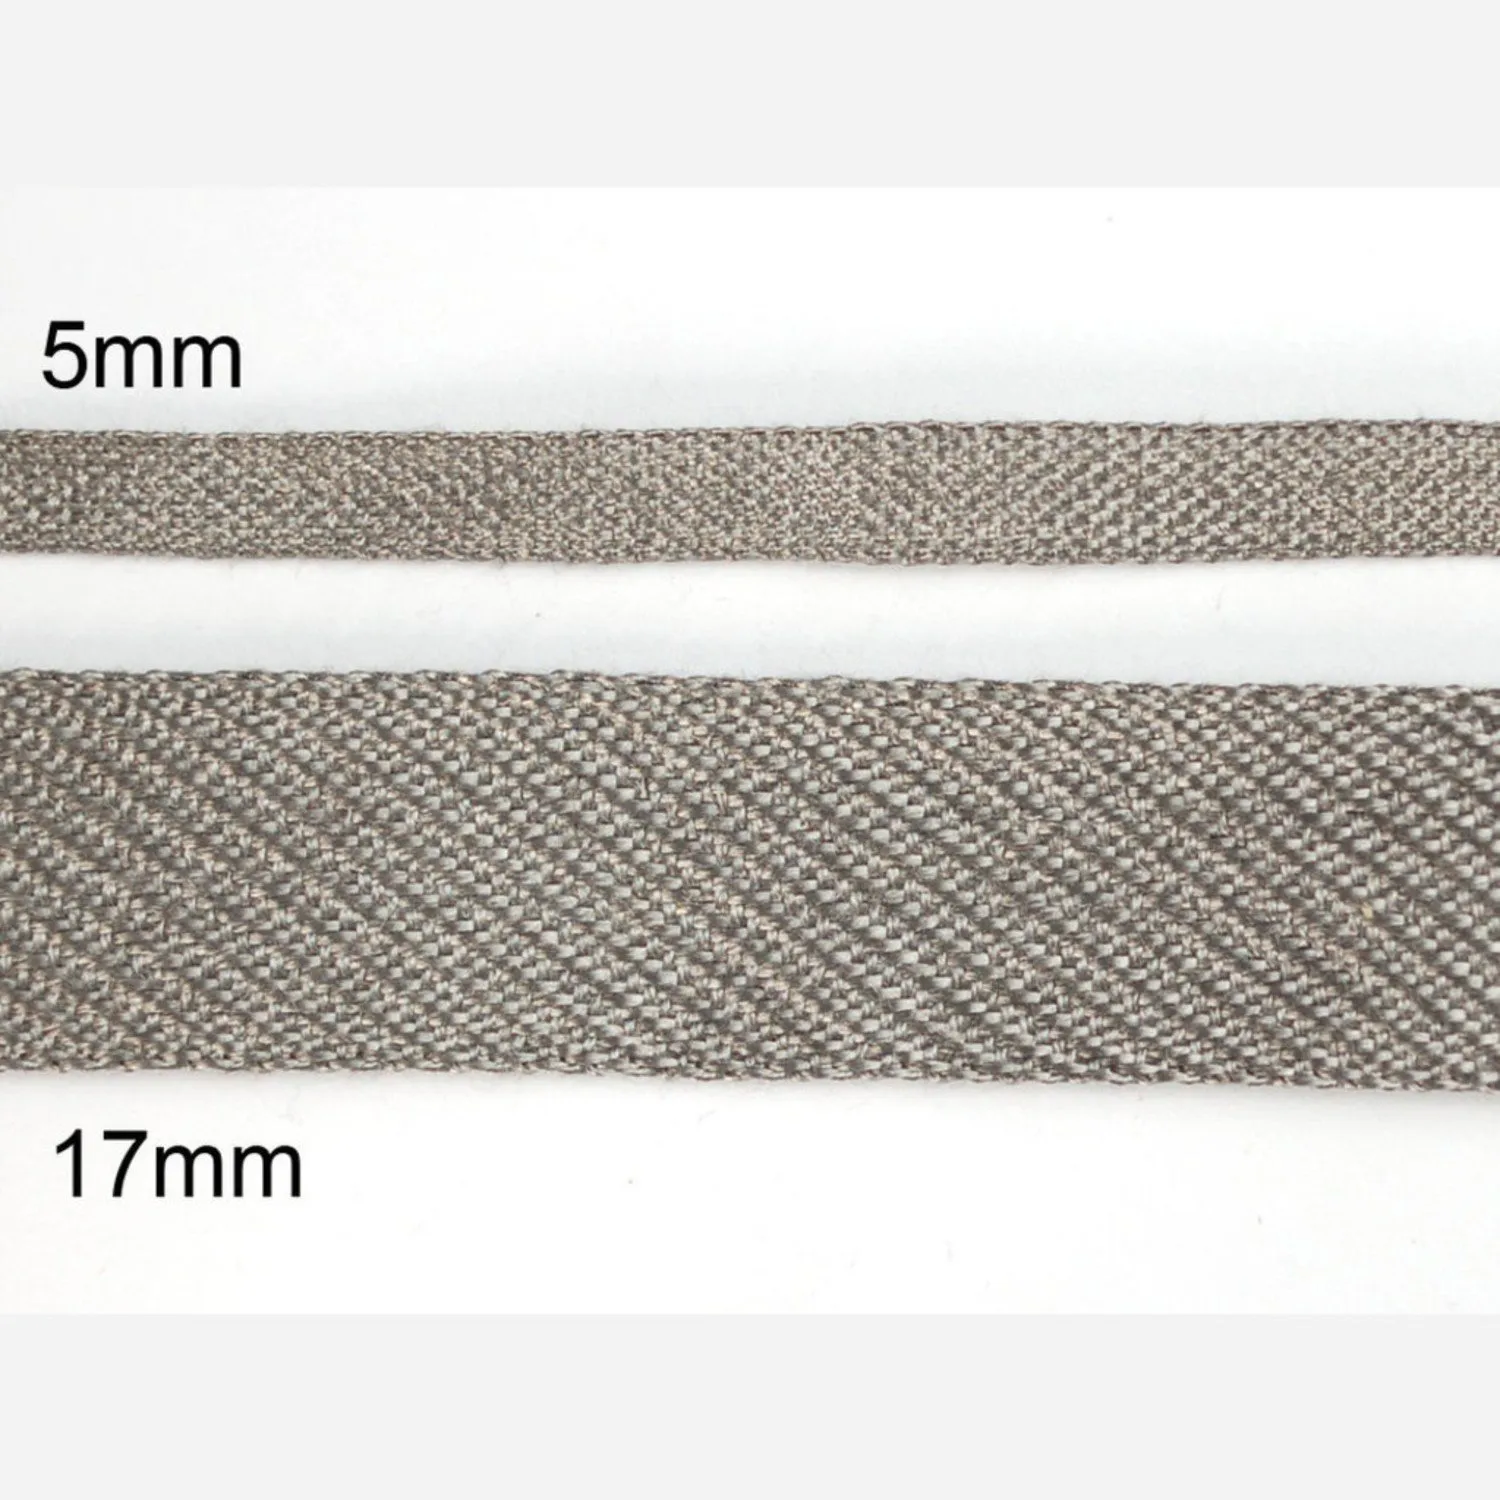 Photo of Stainless Steel Conductive Ribbon - 5mm wide 1 meter long